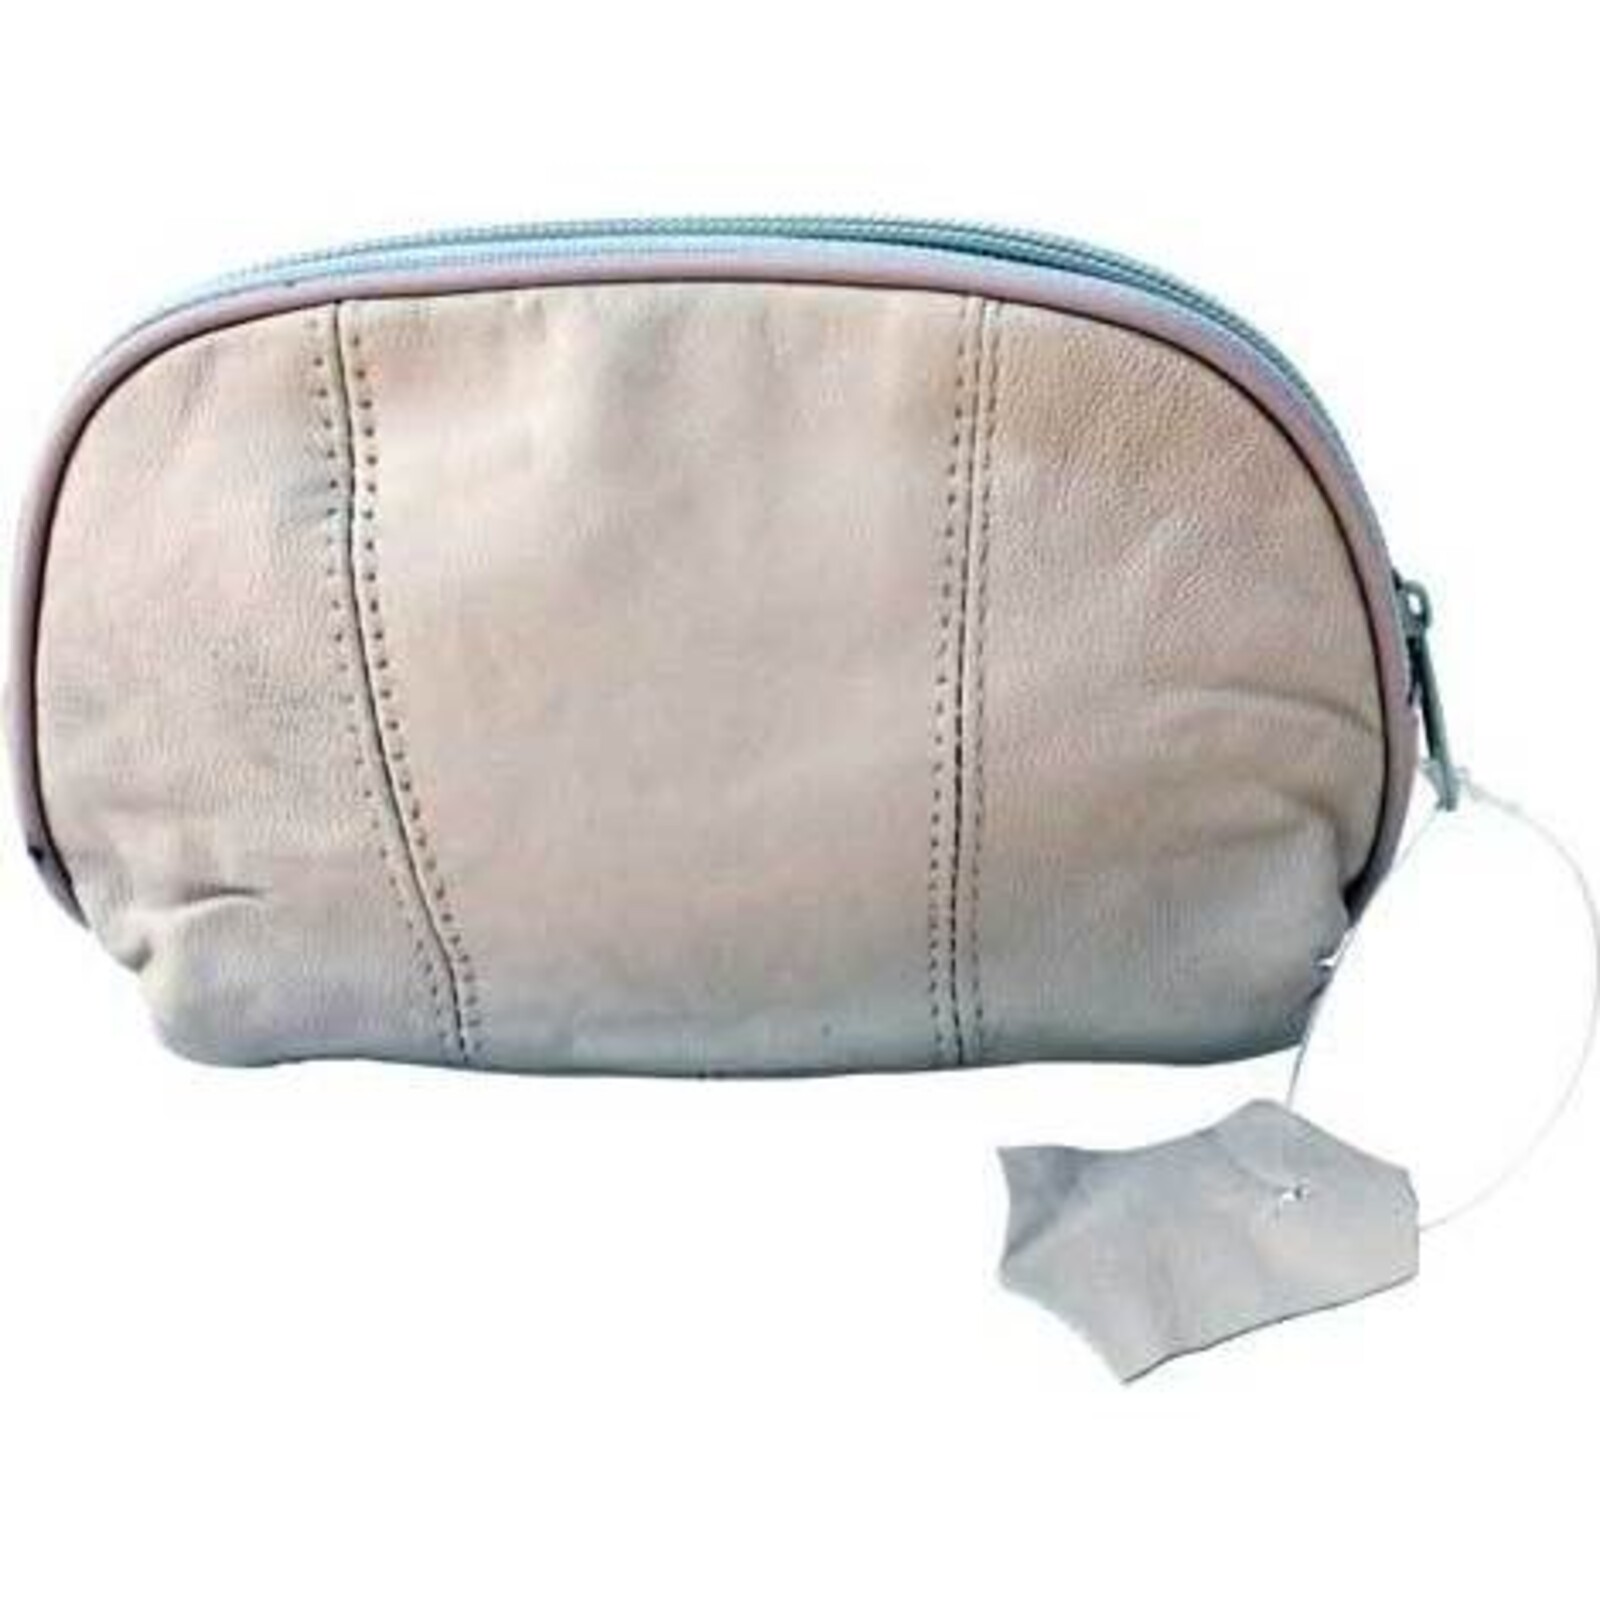 Leather Pouch Purse - Beige